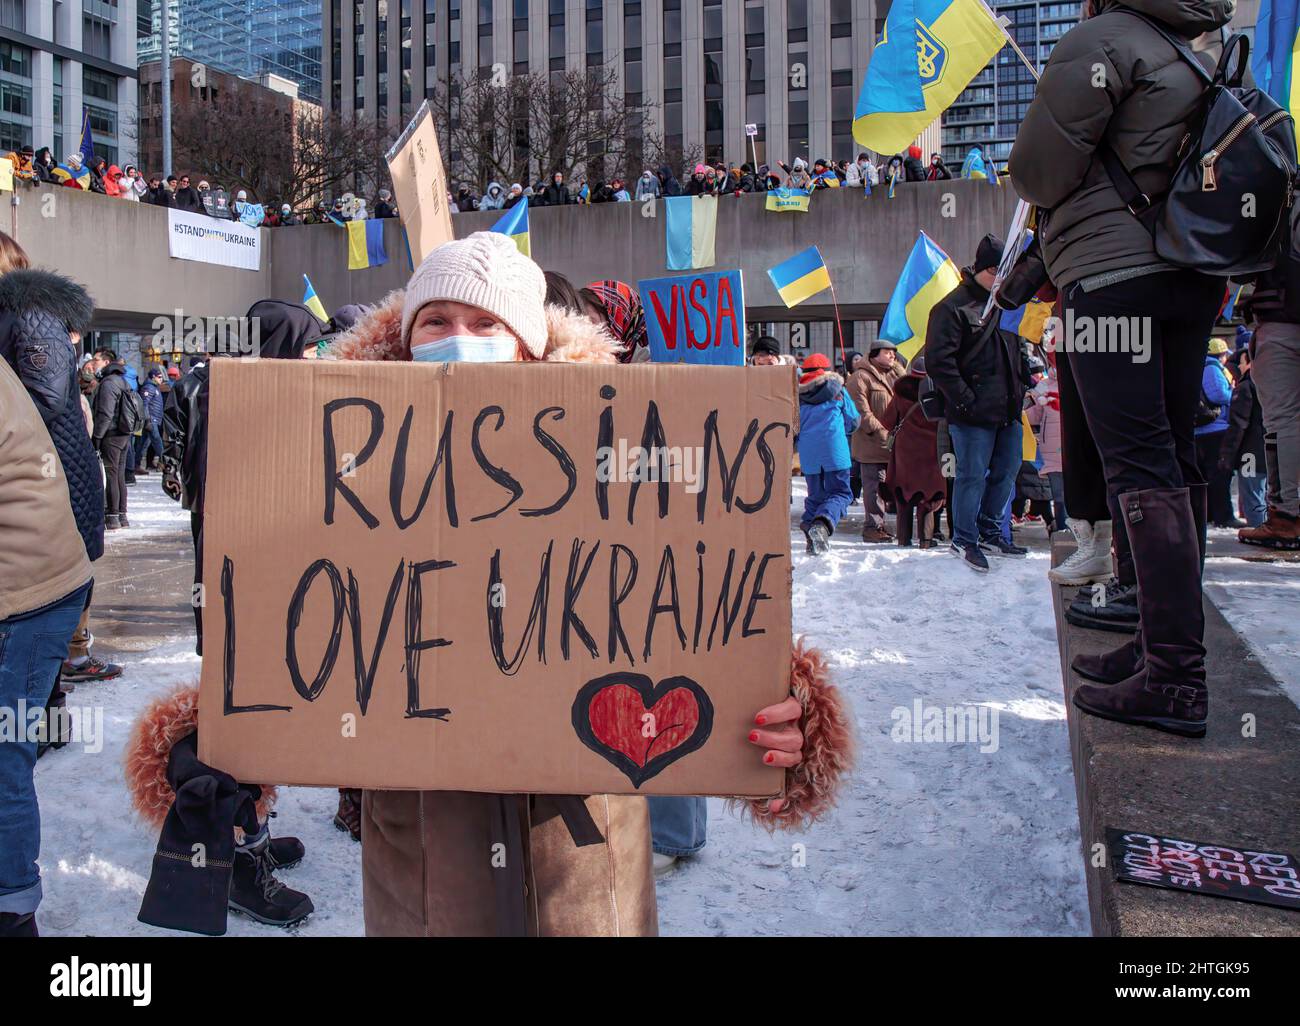 Toronto, Ontario/Canada - February 27, 2022: Senior lady of Russian heritage holds a placard with handwritten note Russians Love Ukraine in Toronto's mega march and rally to support Ukraine and condemn Putin's invasion. Stock Photo